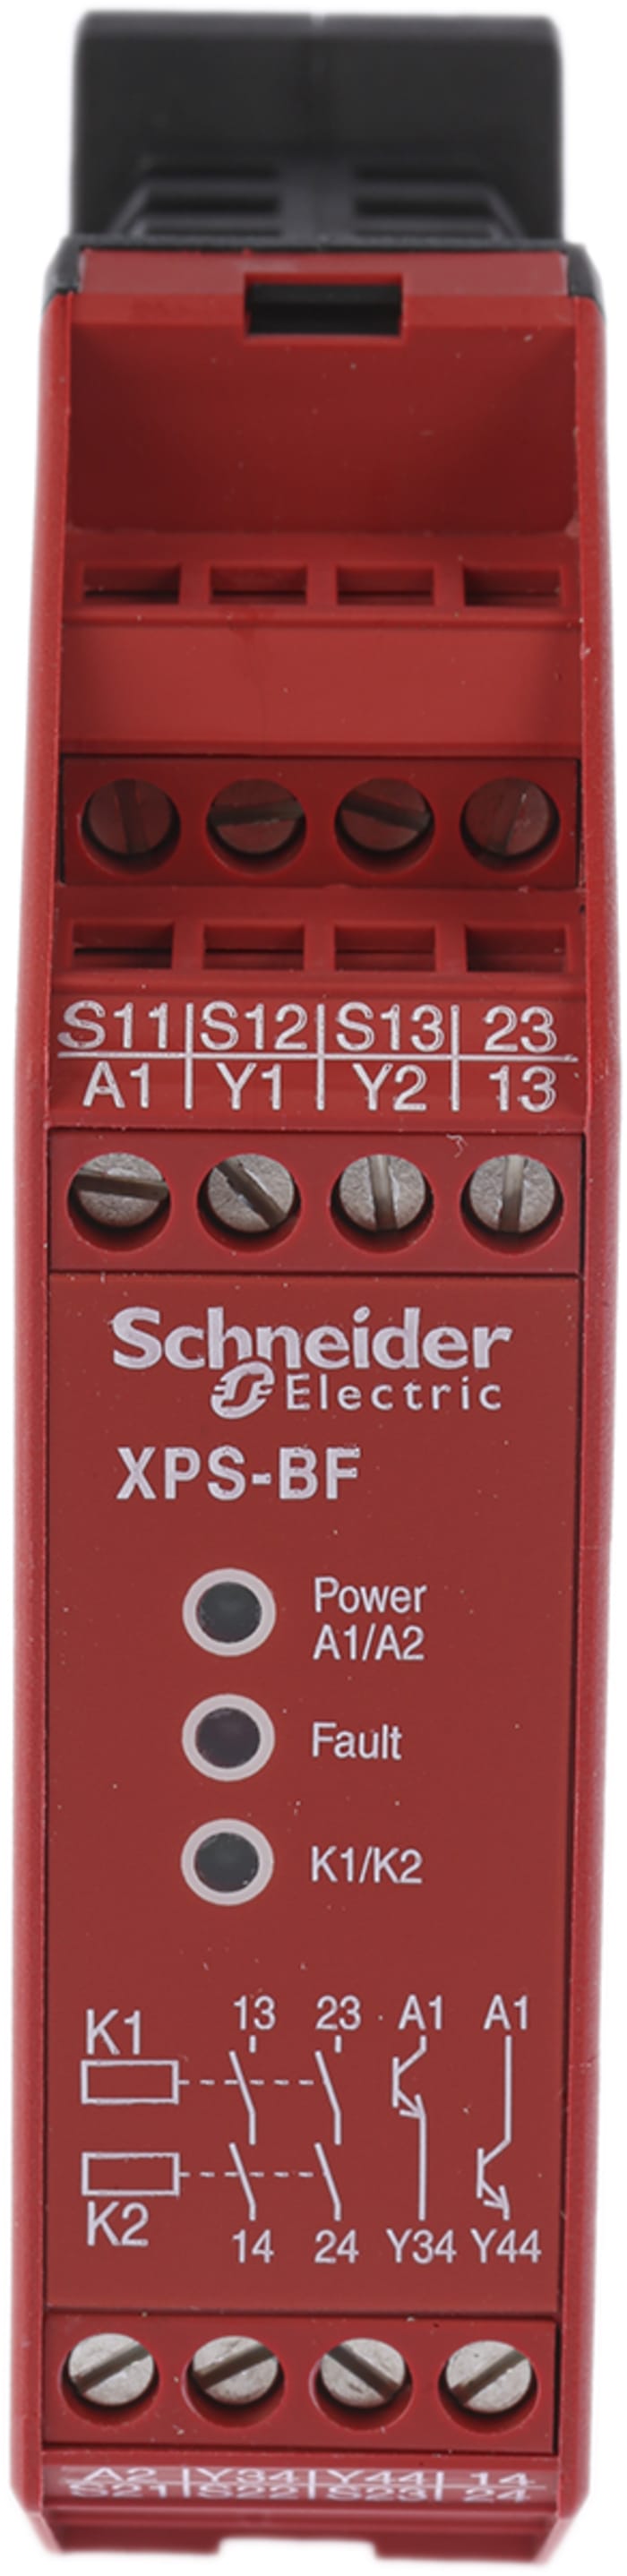 Sump Engager mikro XPSBF1132 Schneider Electric | Schneider Electric Two Hand Control Safety  Relay, 24V dc, 2 Safety Contacts | 447-4607 | RS Components